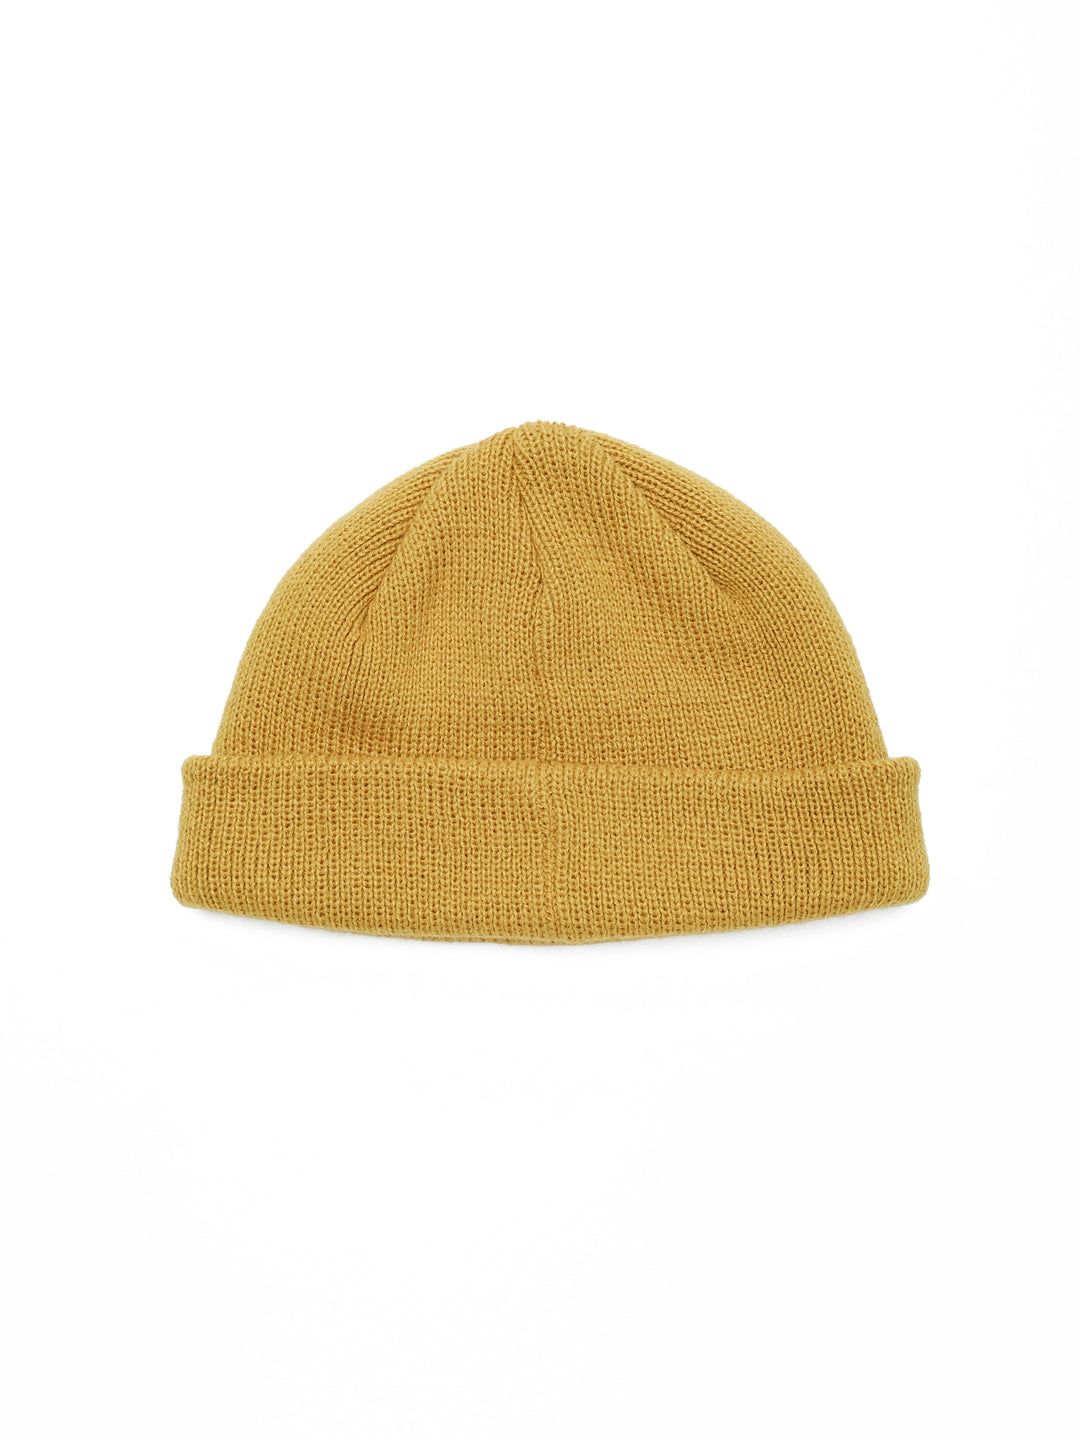 Rollup Beanie / Golden Palm - West of Camden - Main Image Number 2 of 2